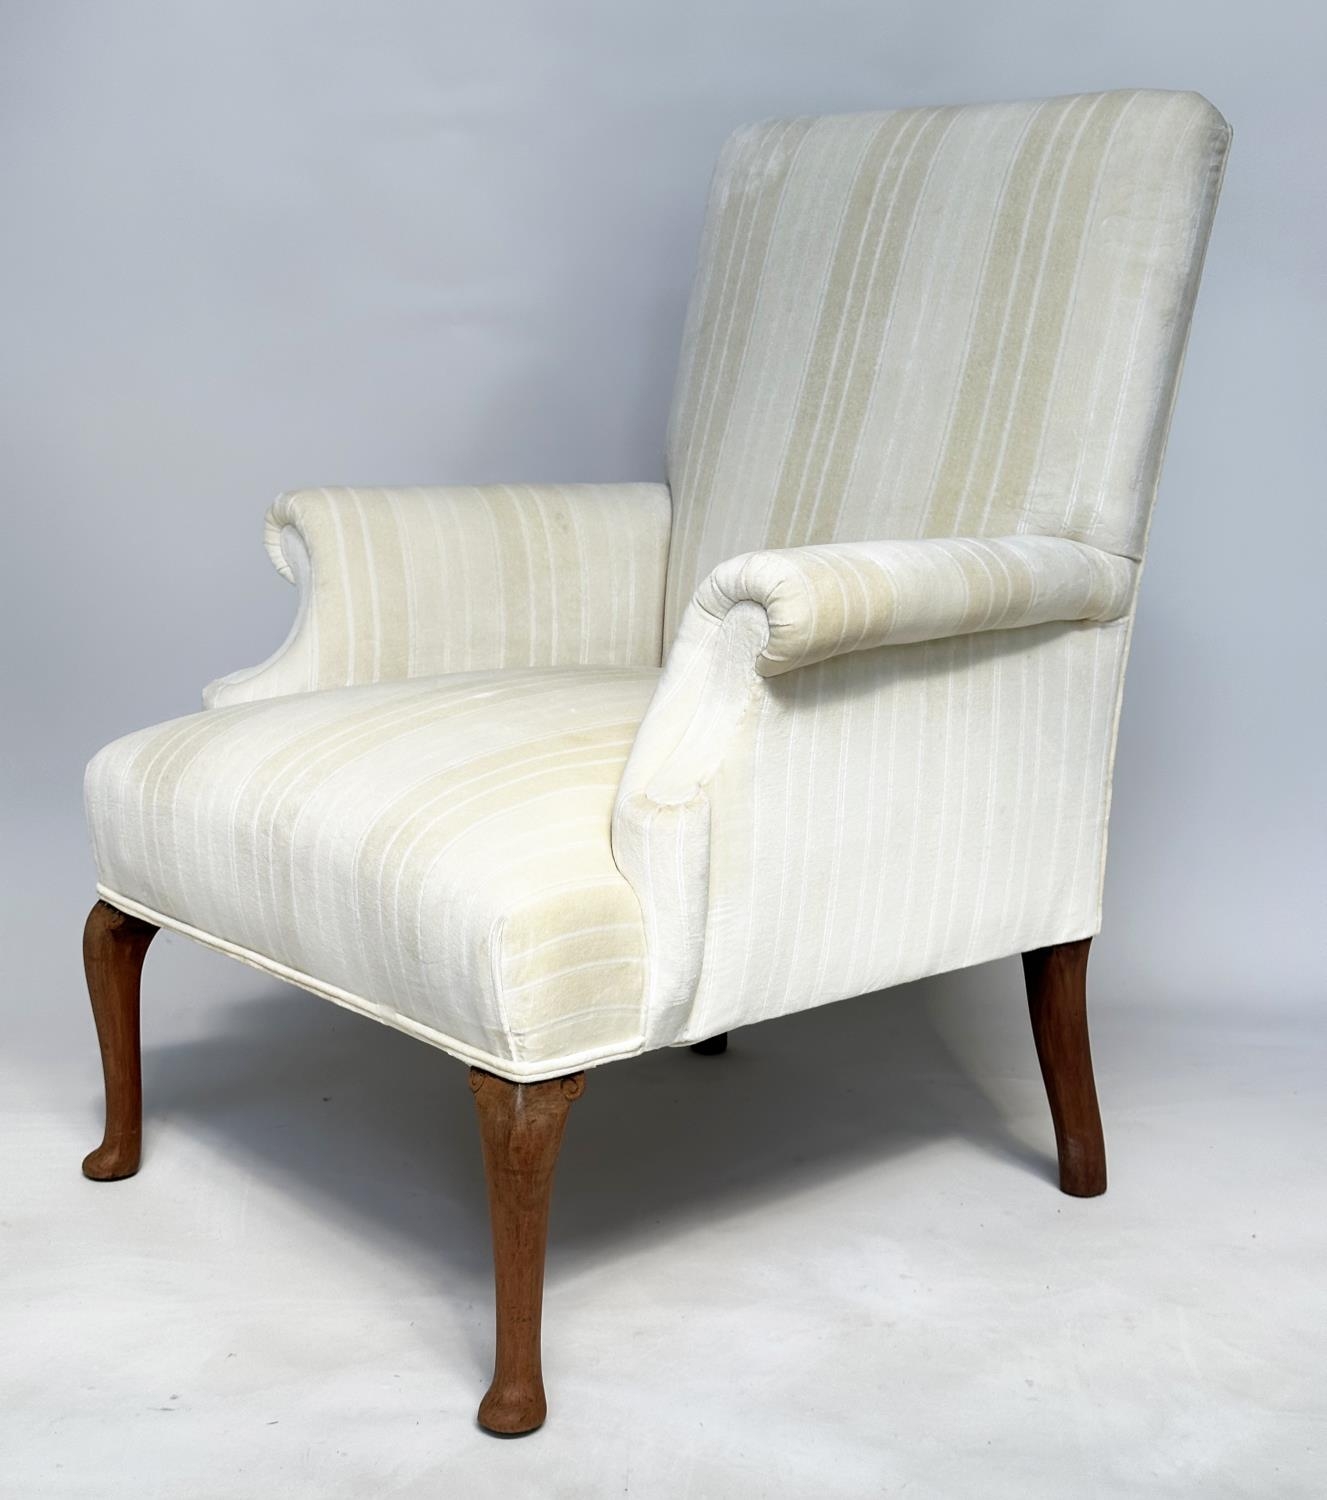 SCROLL ARMCHAIR, Edwardian style recently reupholstered, in neutral woven strip cotton with shaped